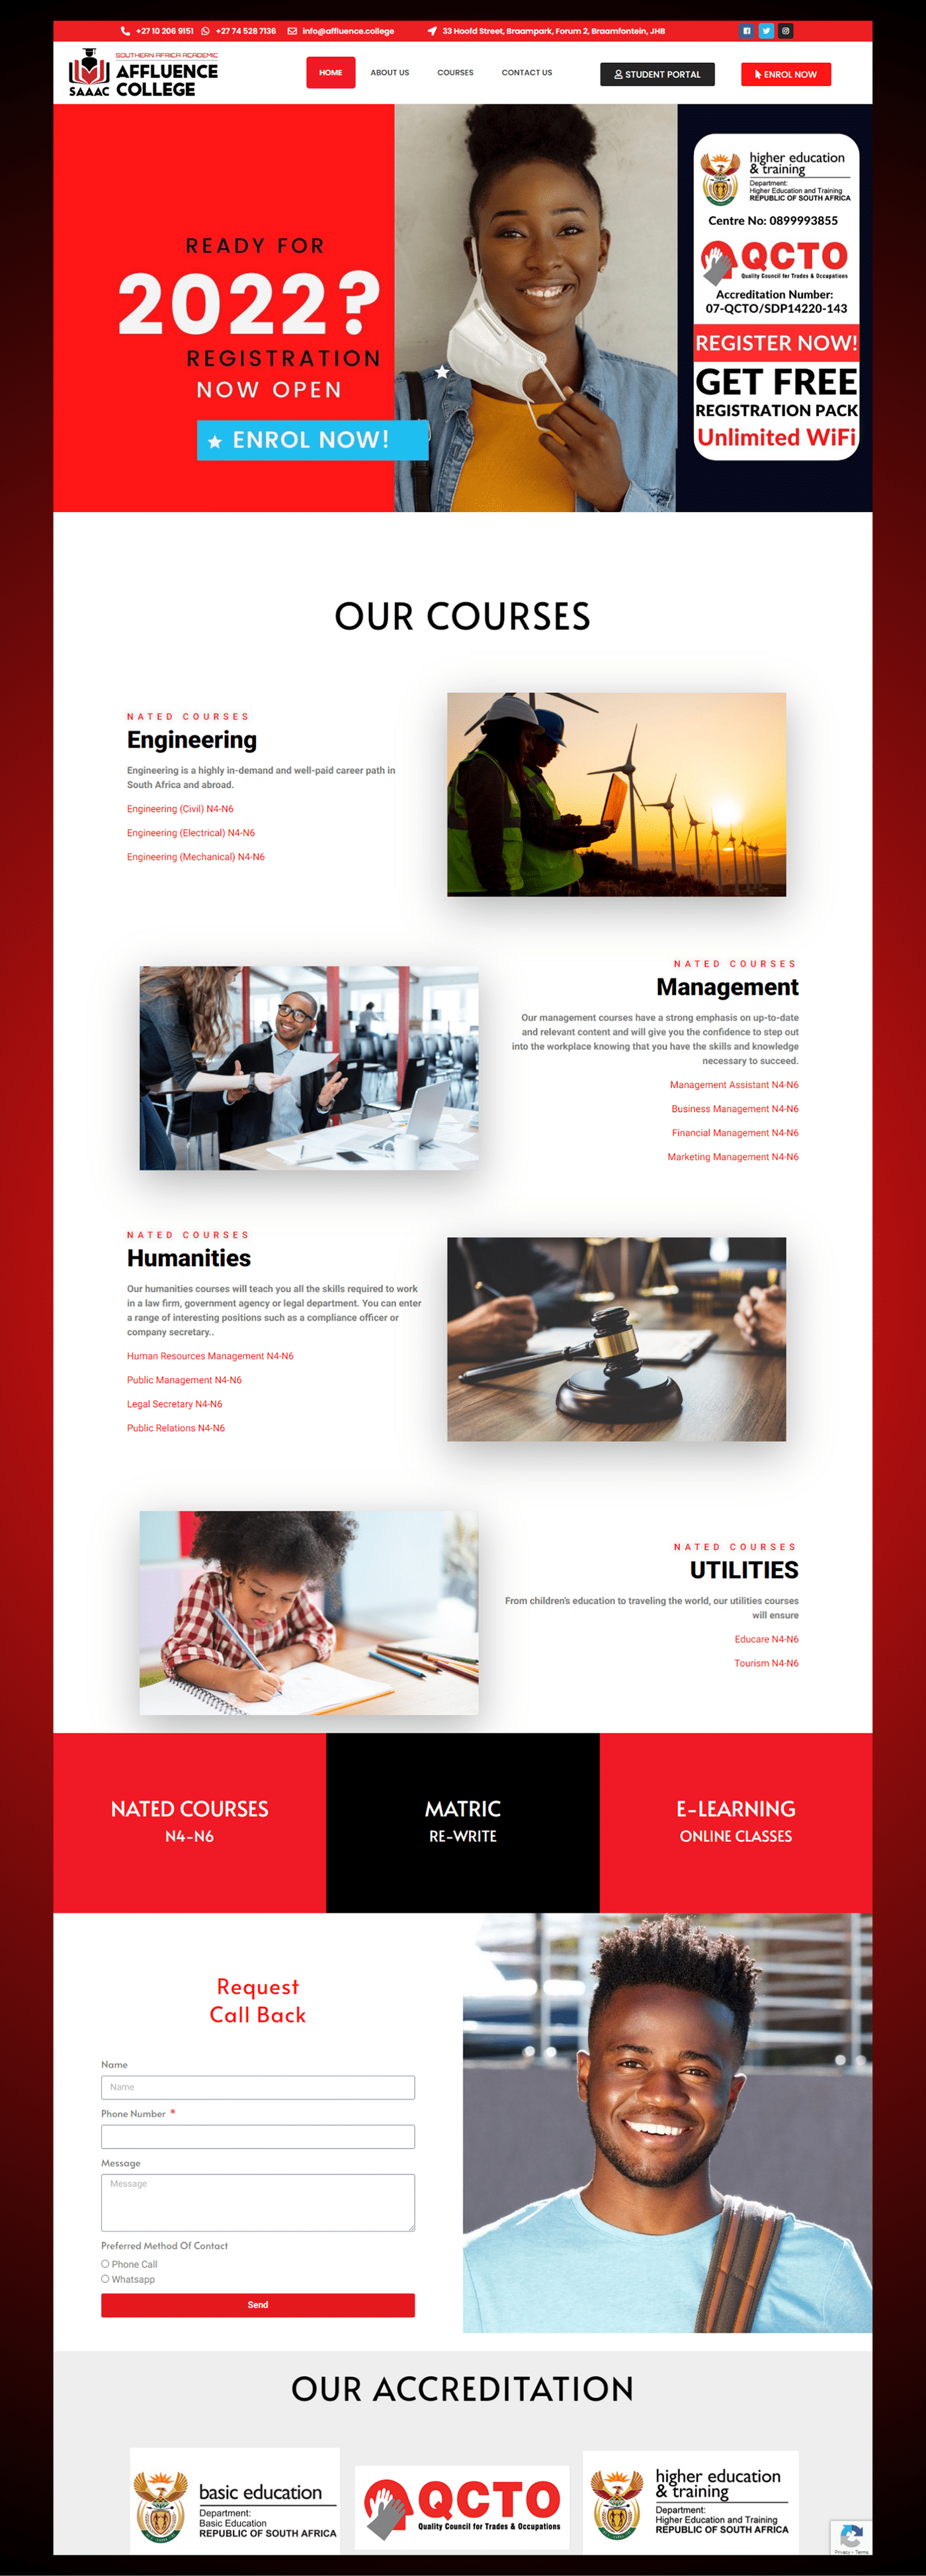 website layout for Affluence College done by David Mutero 